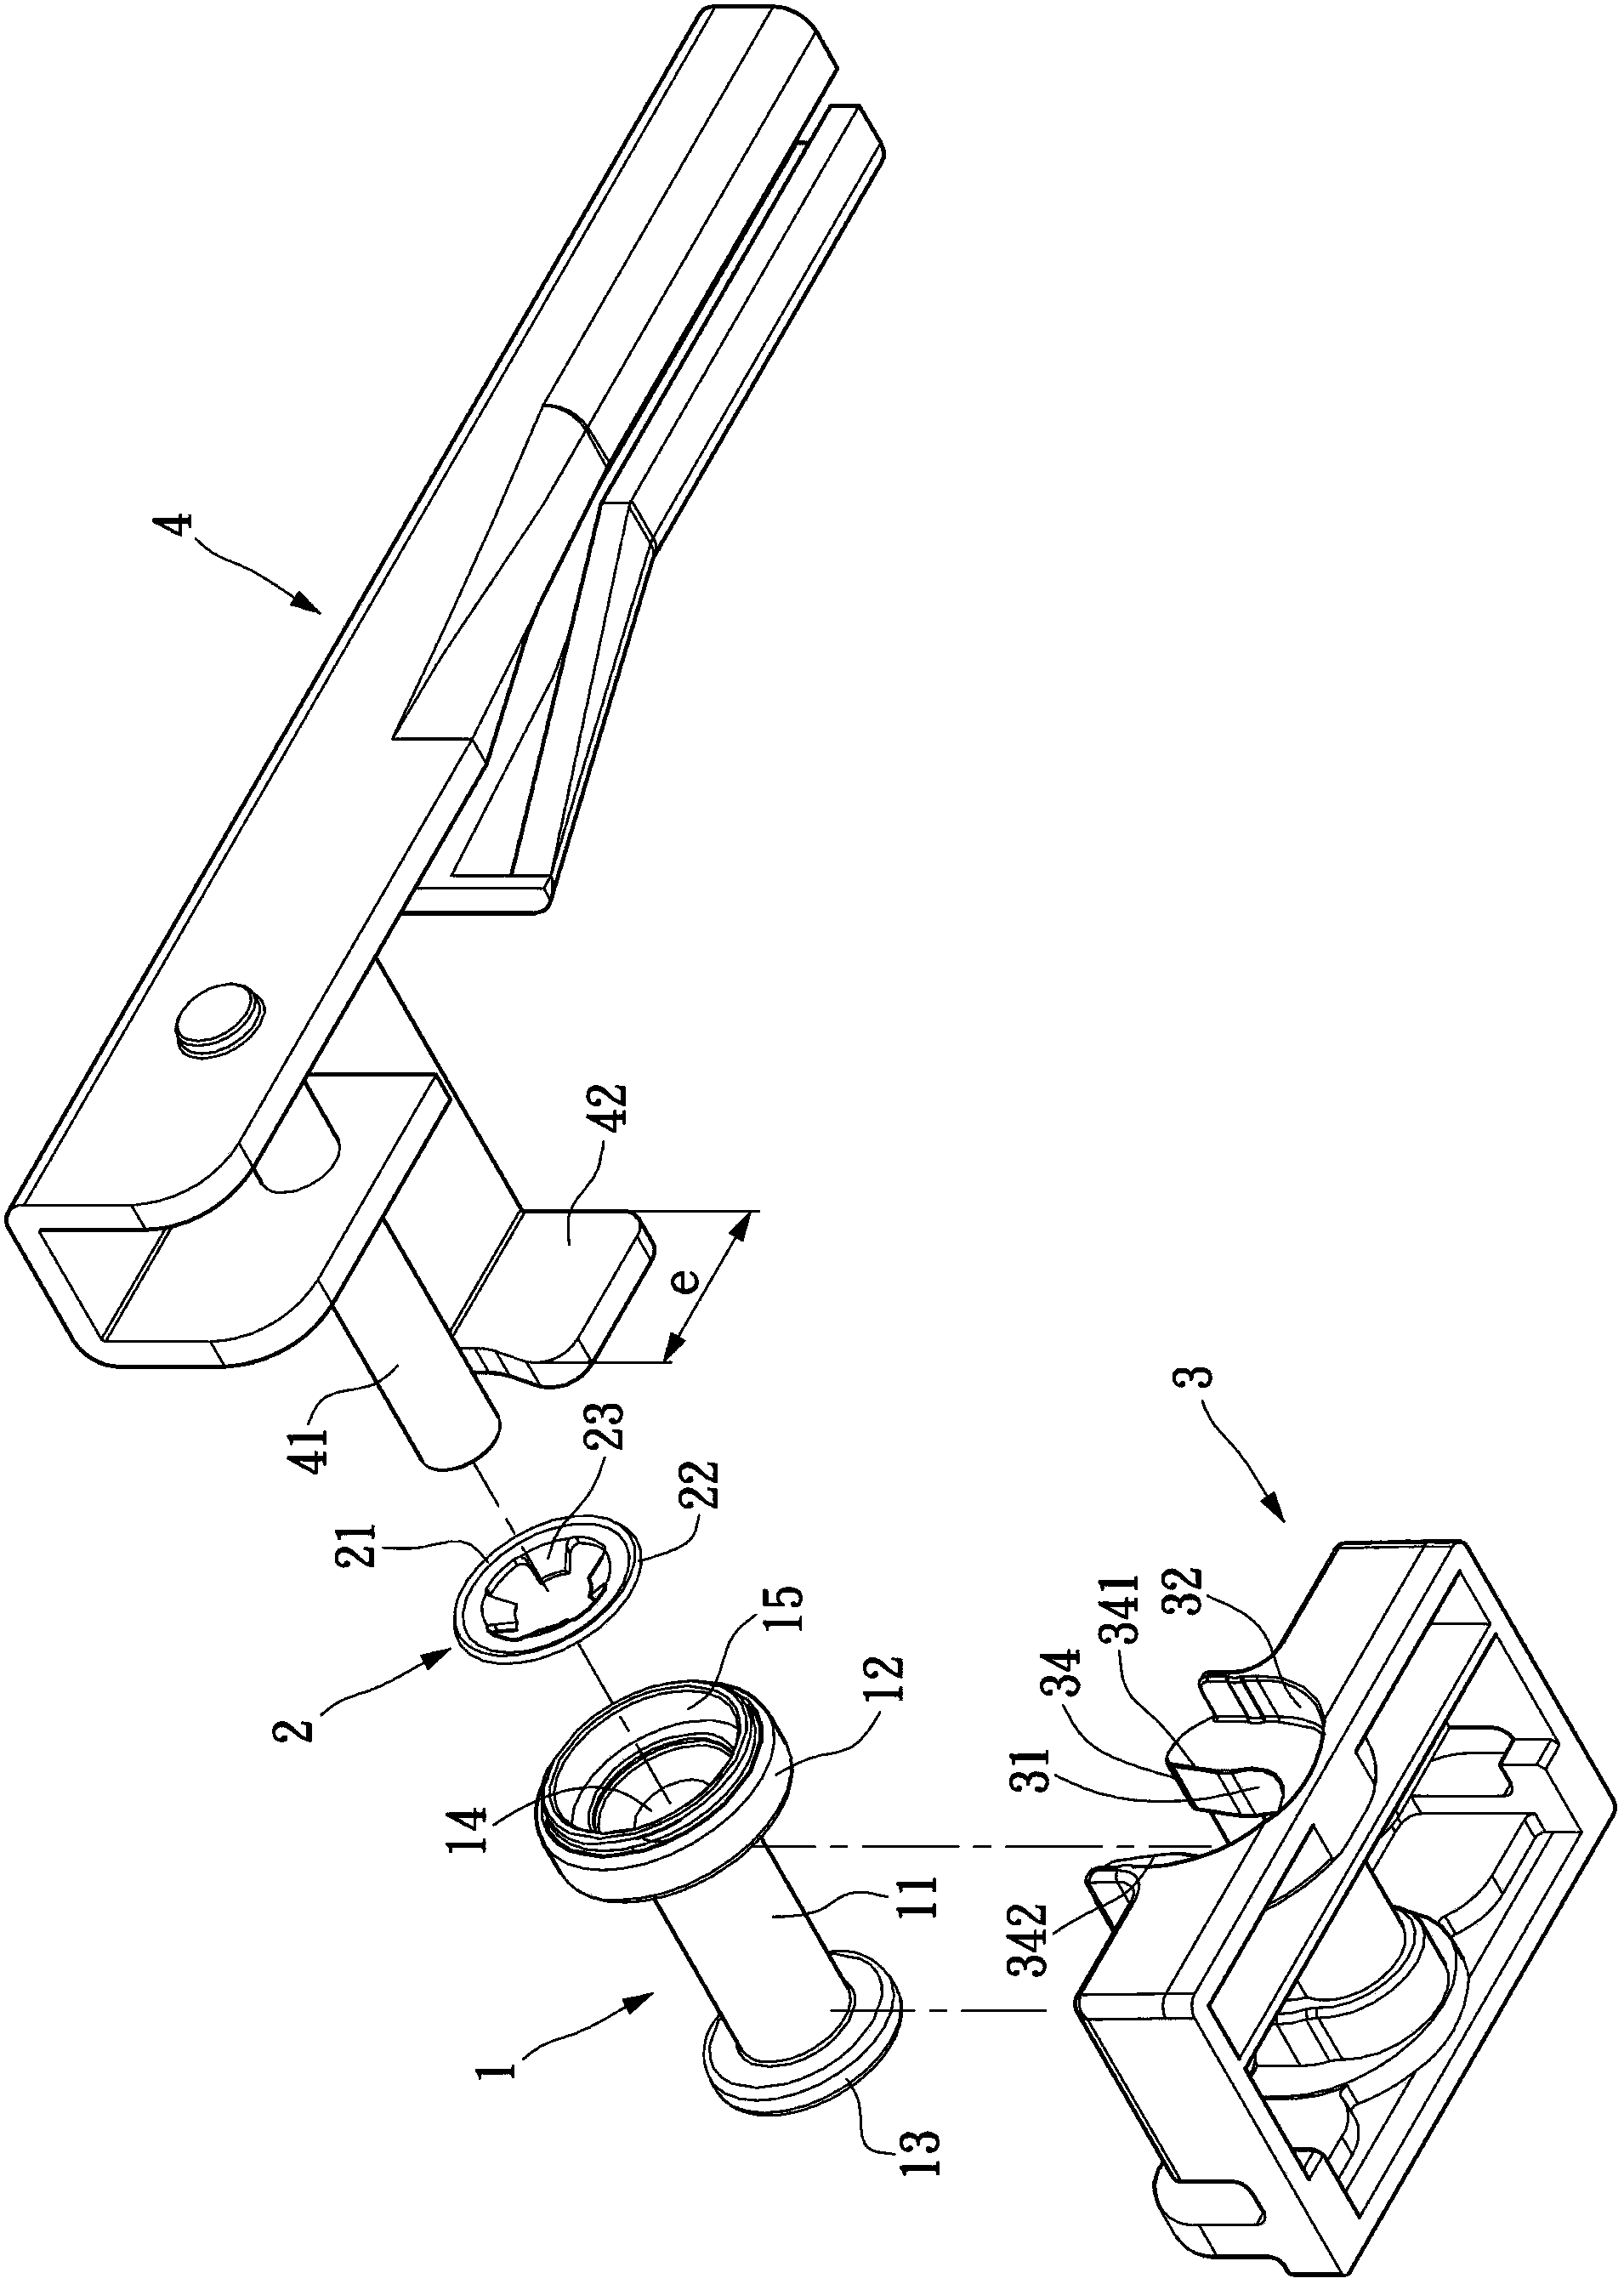 Windshield wiper connector and bolt force application stabilization sleeve